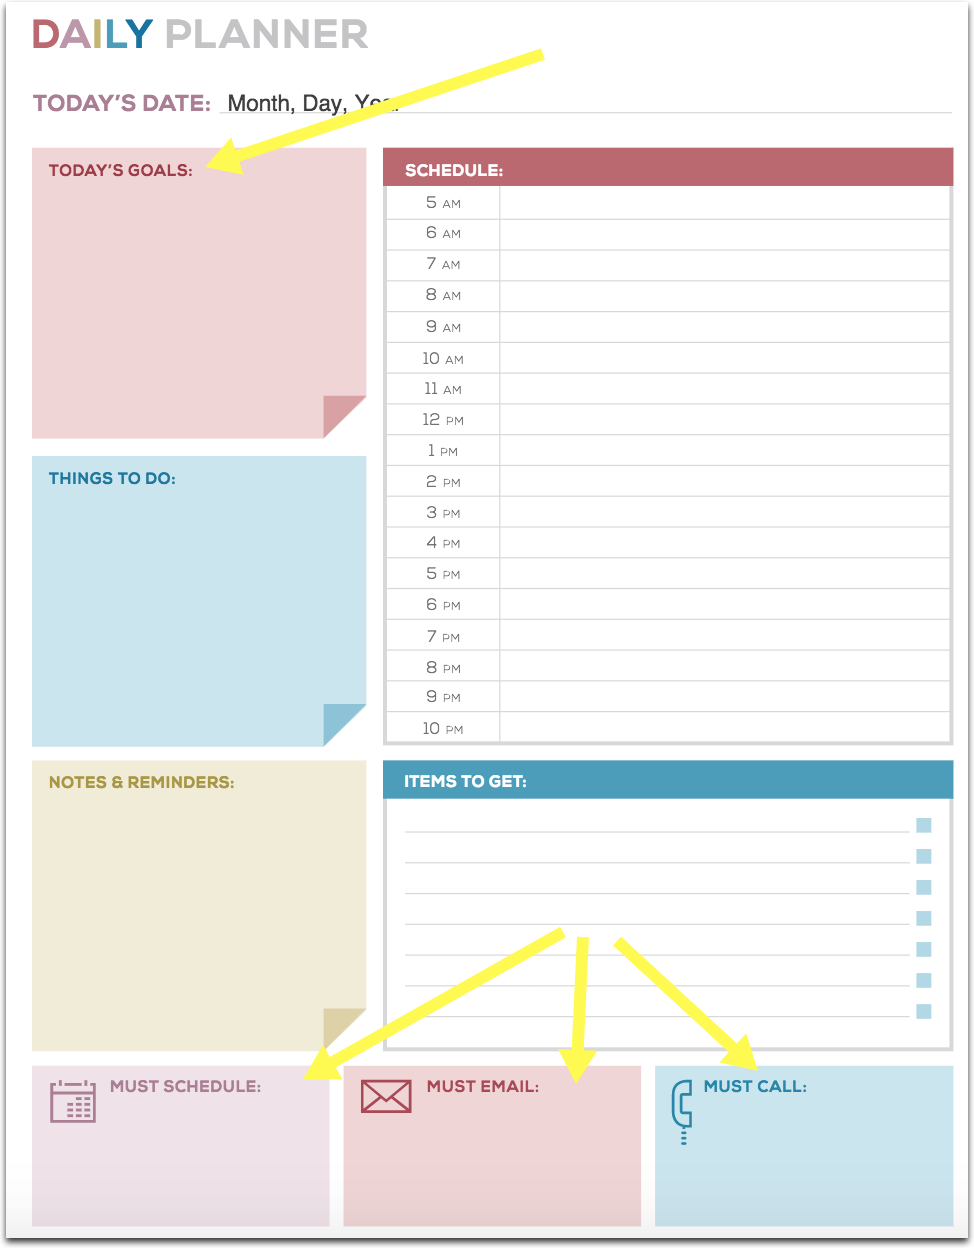 Daily Planner Template from howtonow.com